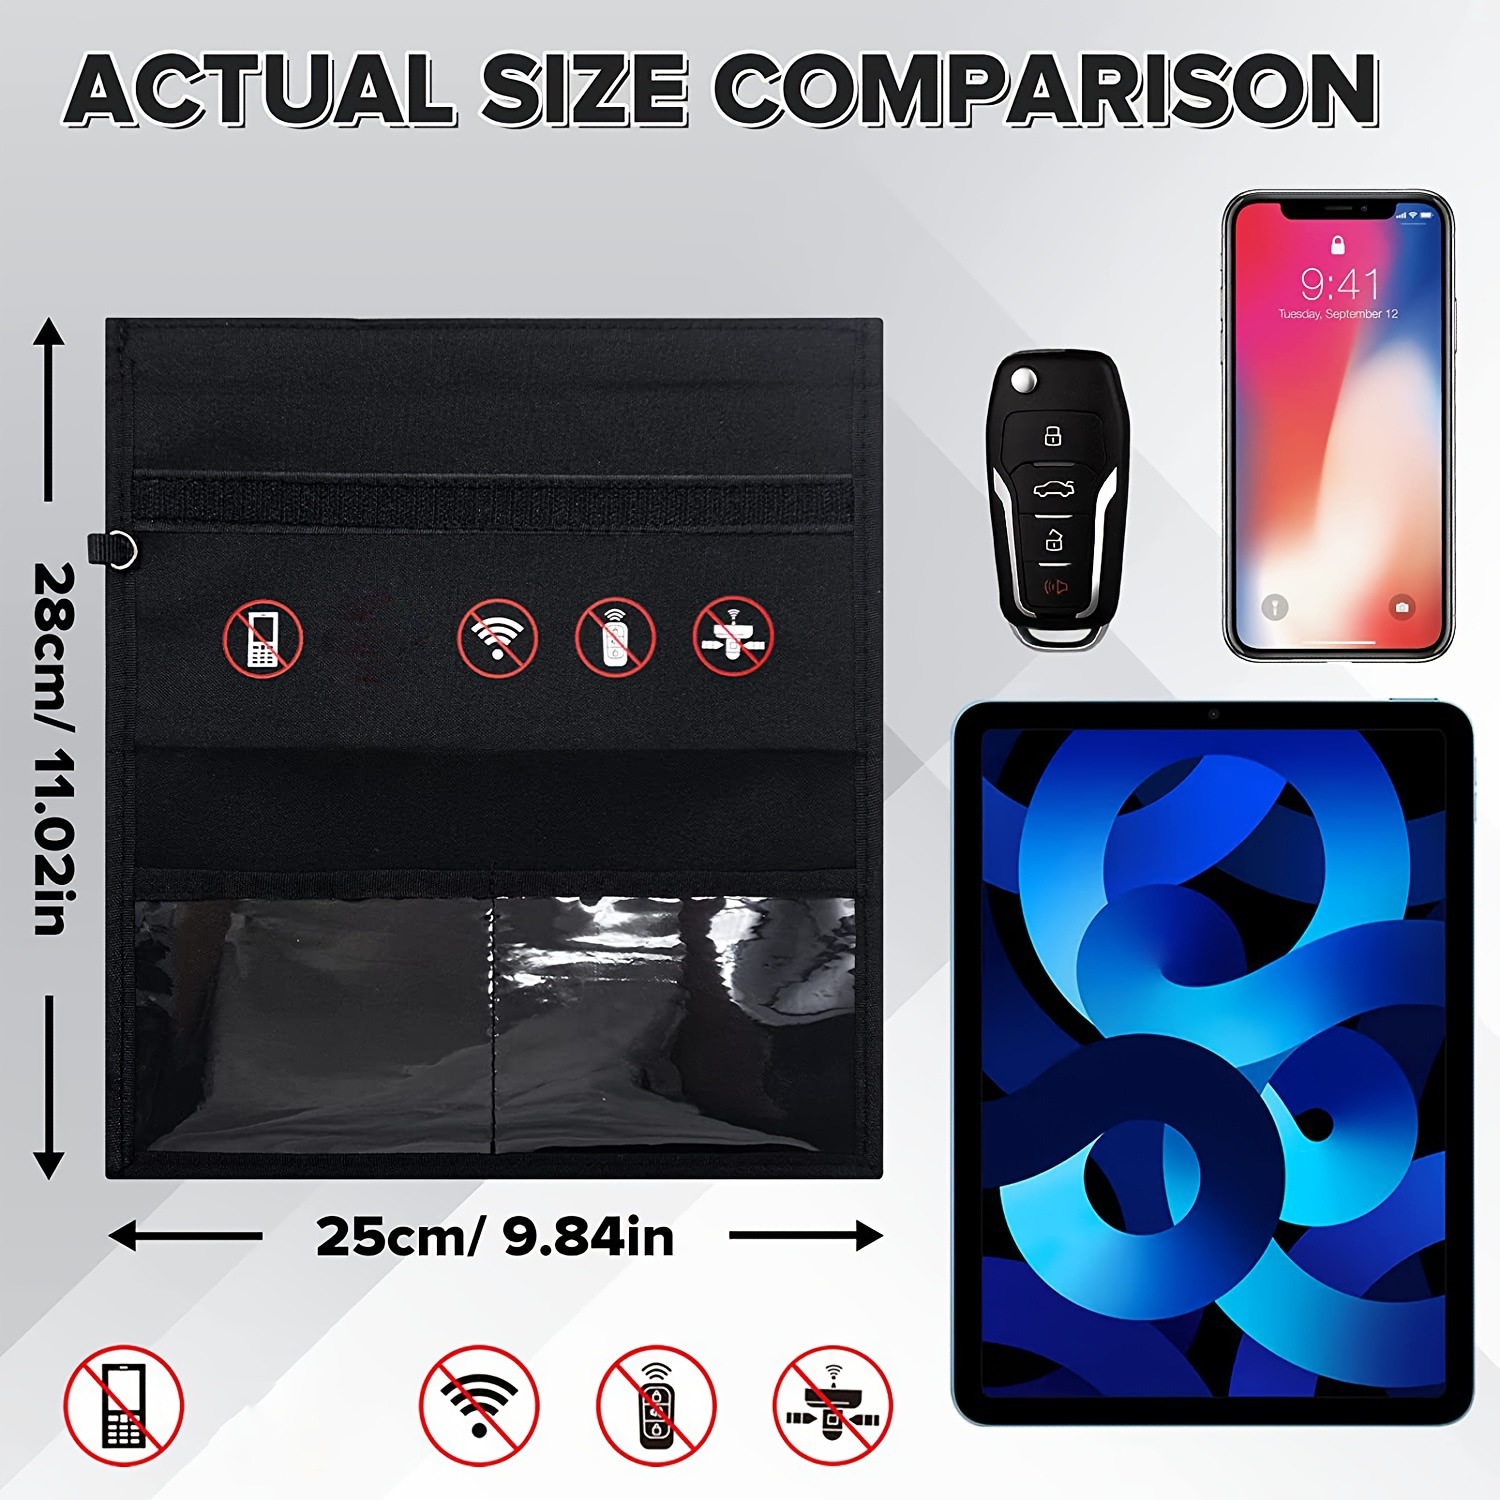 car key fobs bag faraday bags for phones tablets signal blocking bag for data security privacy anti tracking for pregnant